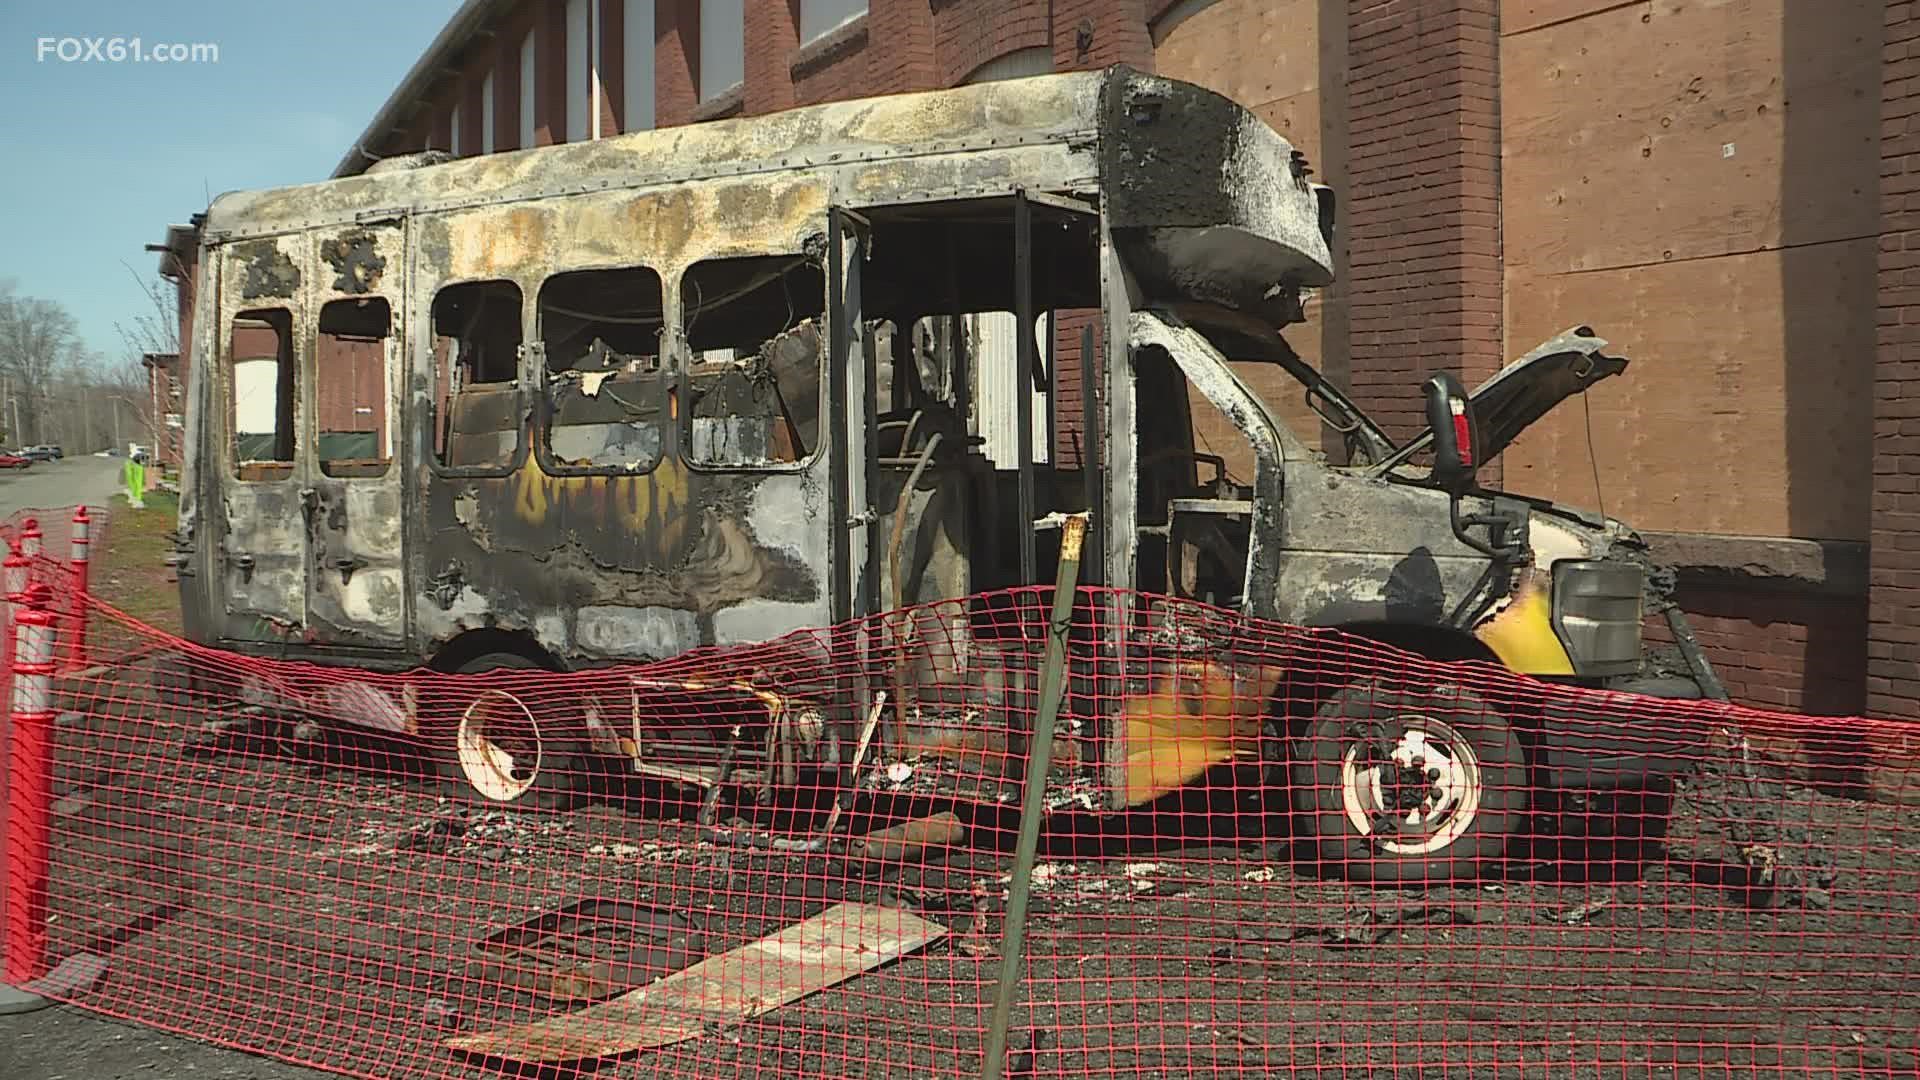 Their old food truck caught fire and was destroyed